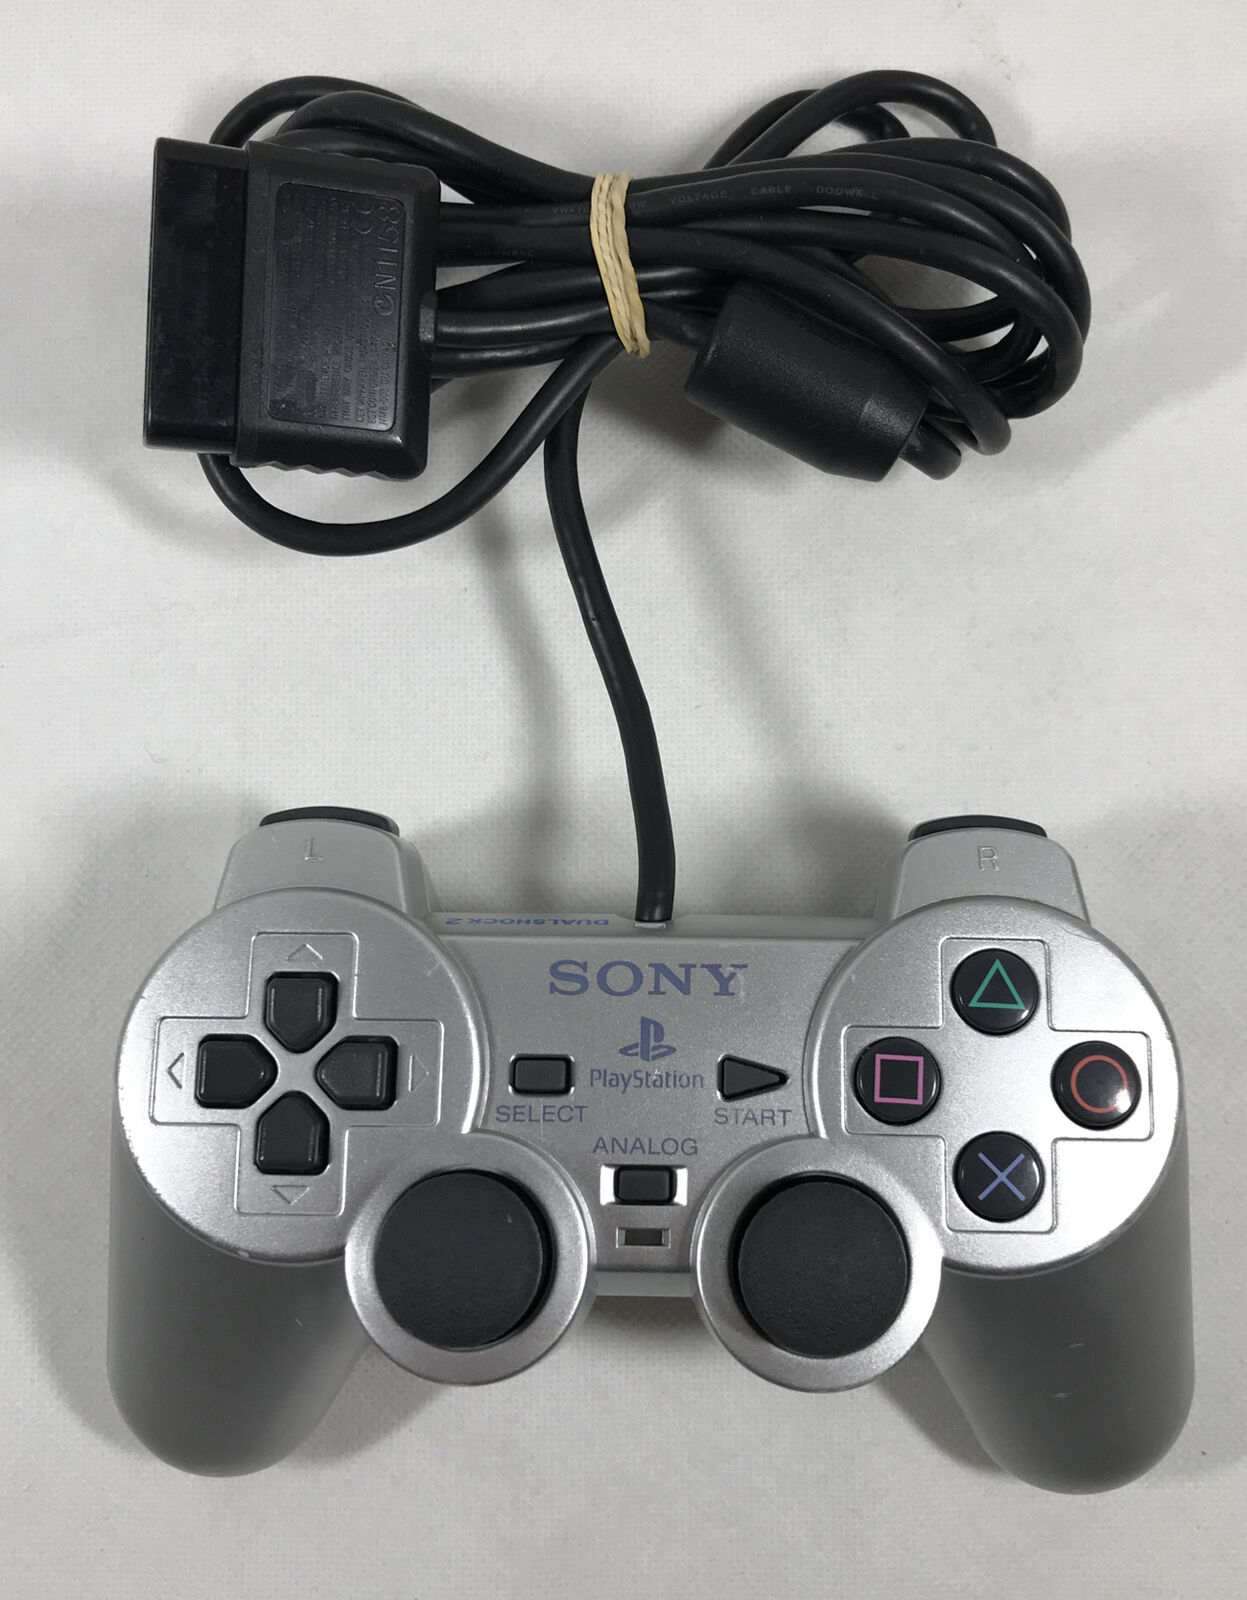 Genuine Original Playstation 2 Silver Controller Ps2 Controller – Works  Perfect - Starboard Games